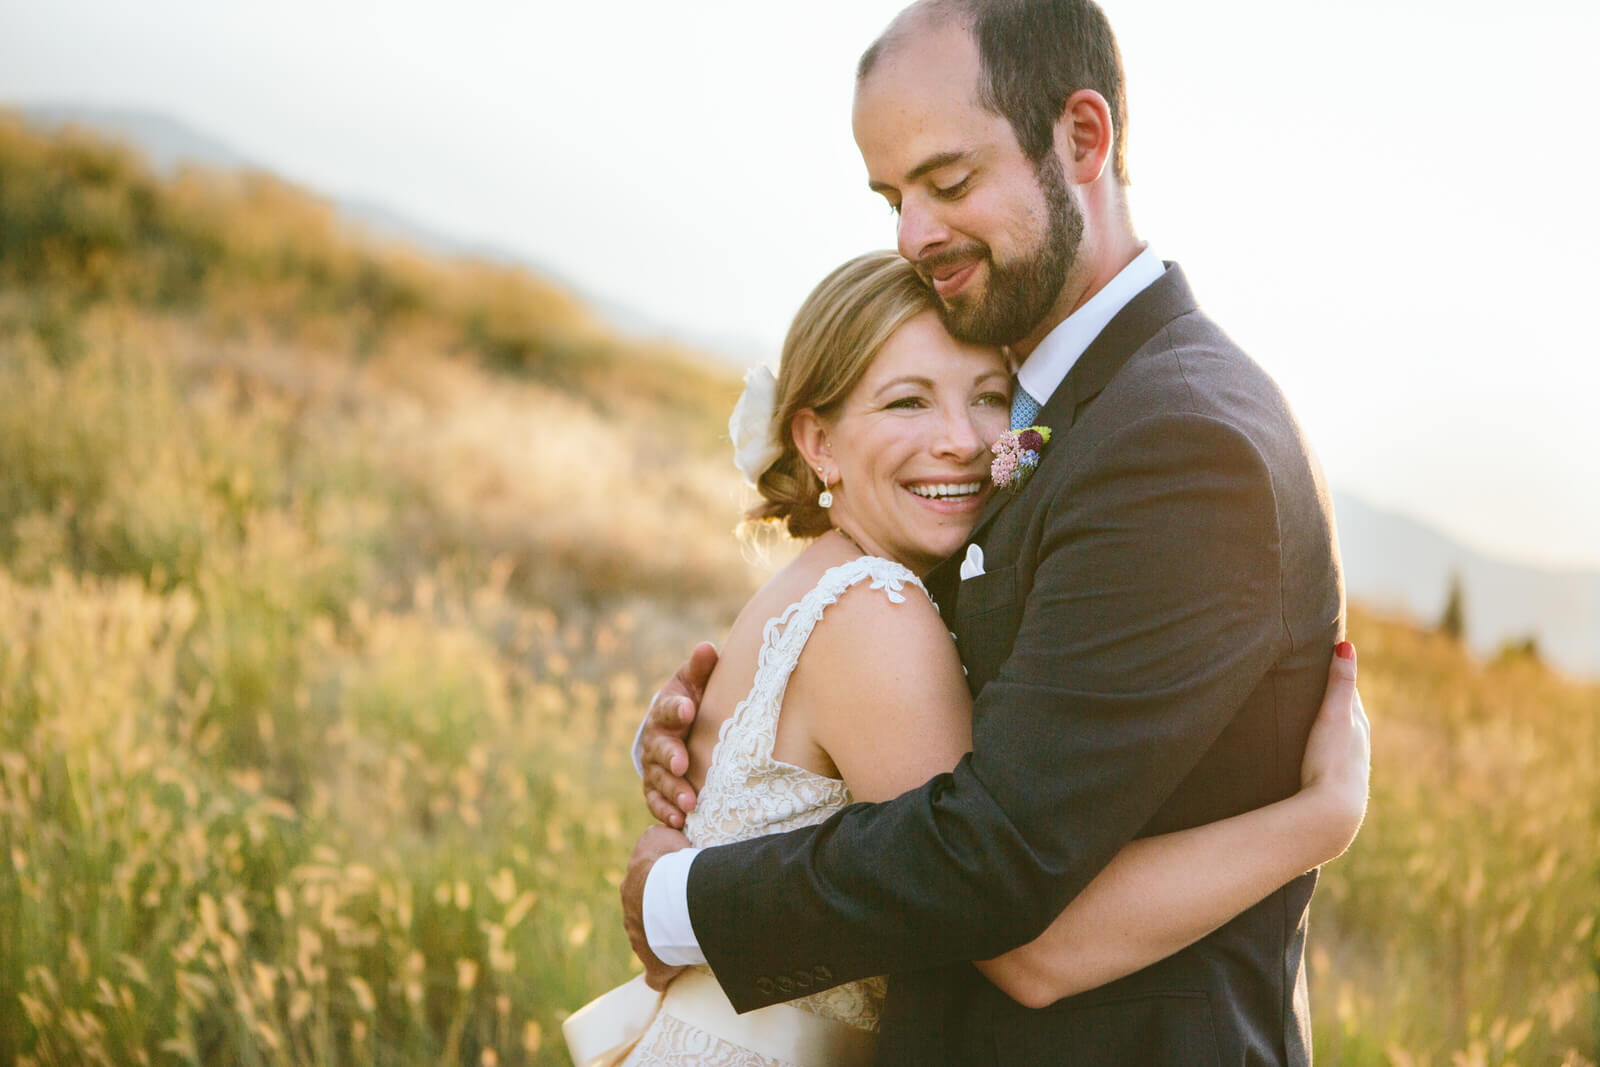 A bride and groom embrace in front of a field of grass at their wedding at the Barn on Mullan in Missoula Montana